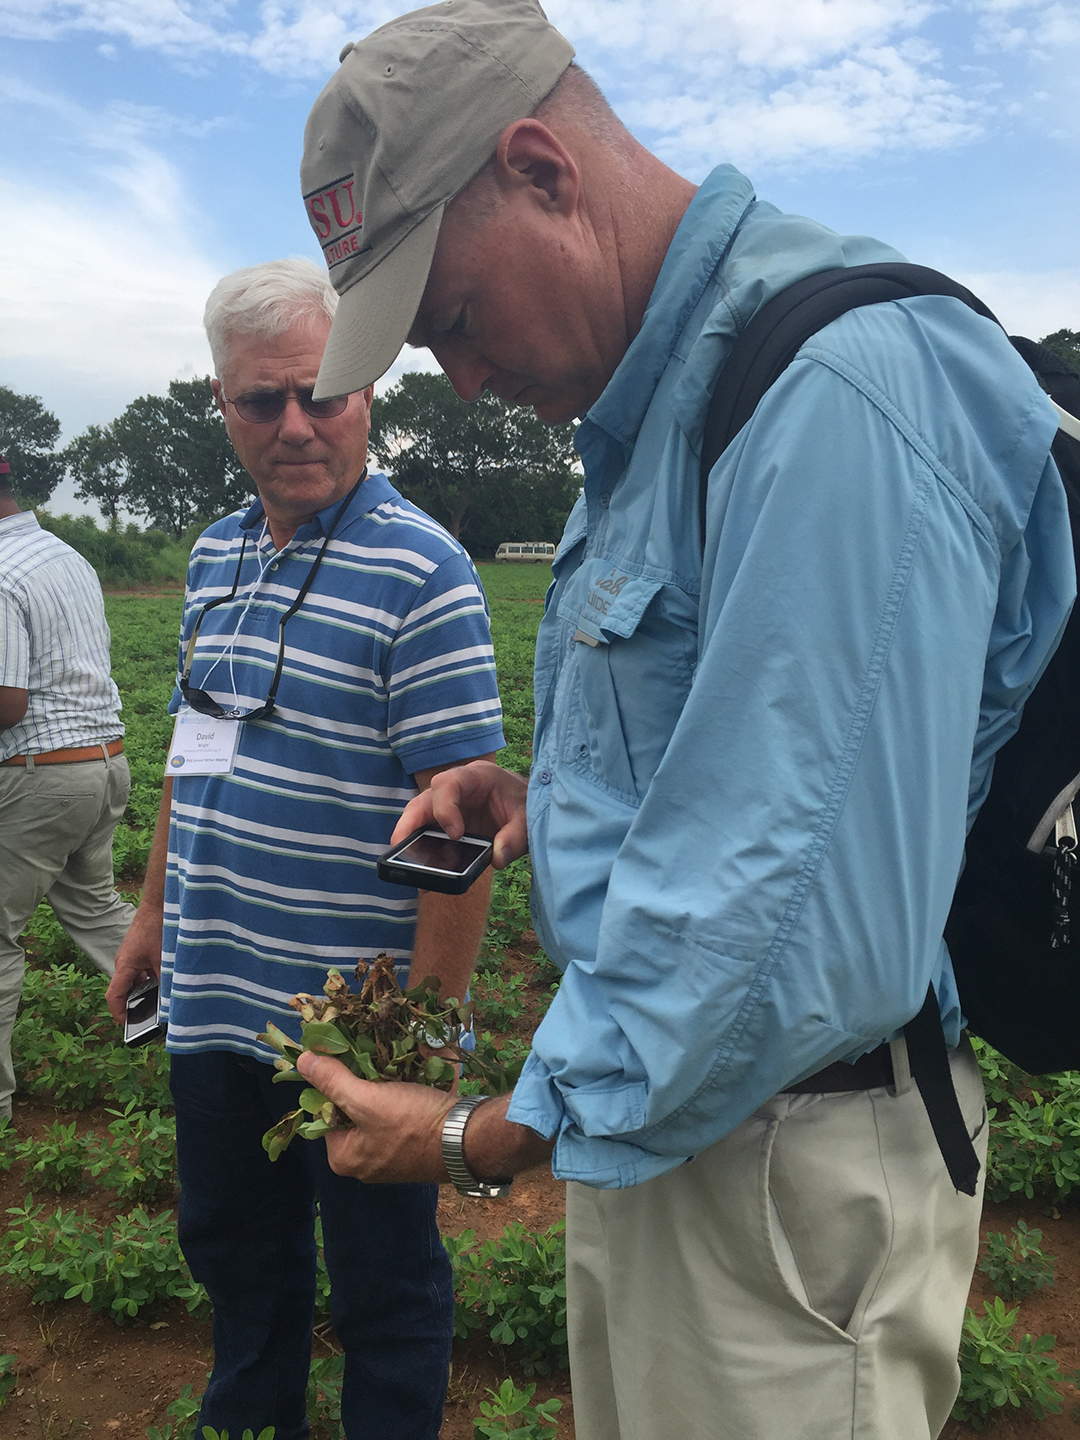 David Jordan, a crop science professor at North Carolina State University, is lead scientist on a project through the Peanut Innovation Lab at the University of Georgia to update a risk assessment tool for farmers in North Carolina and overseas partners. (Photo by Allison Floyd)